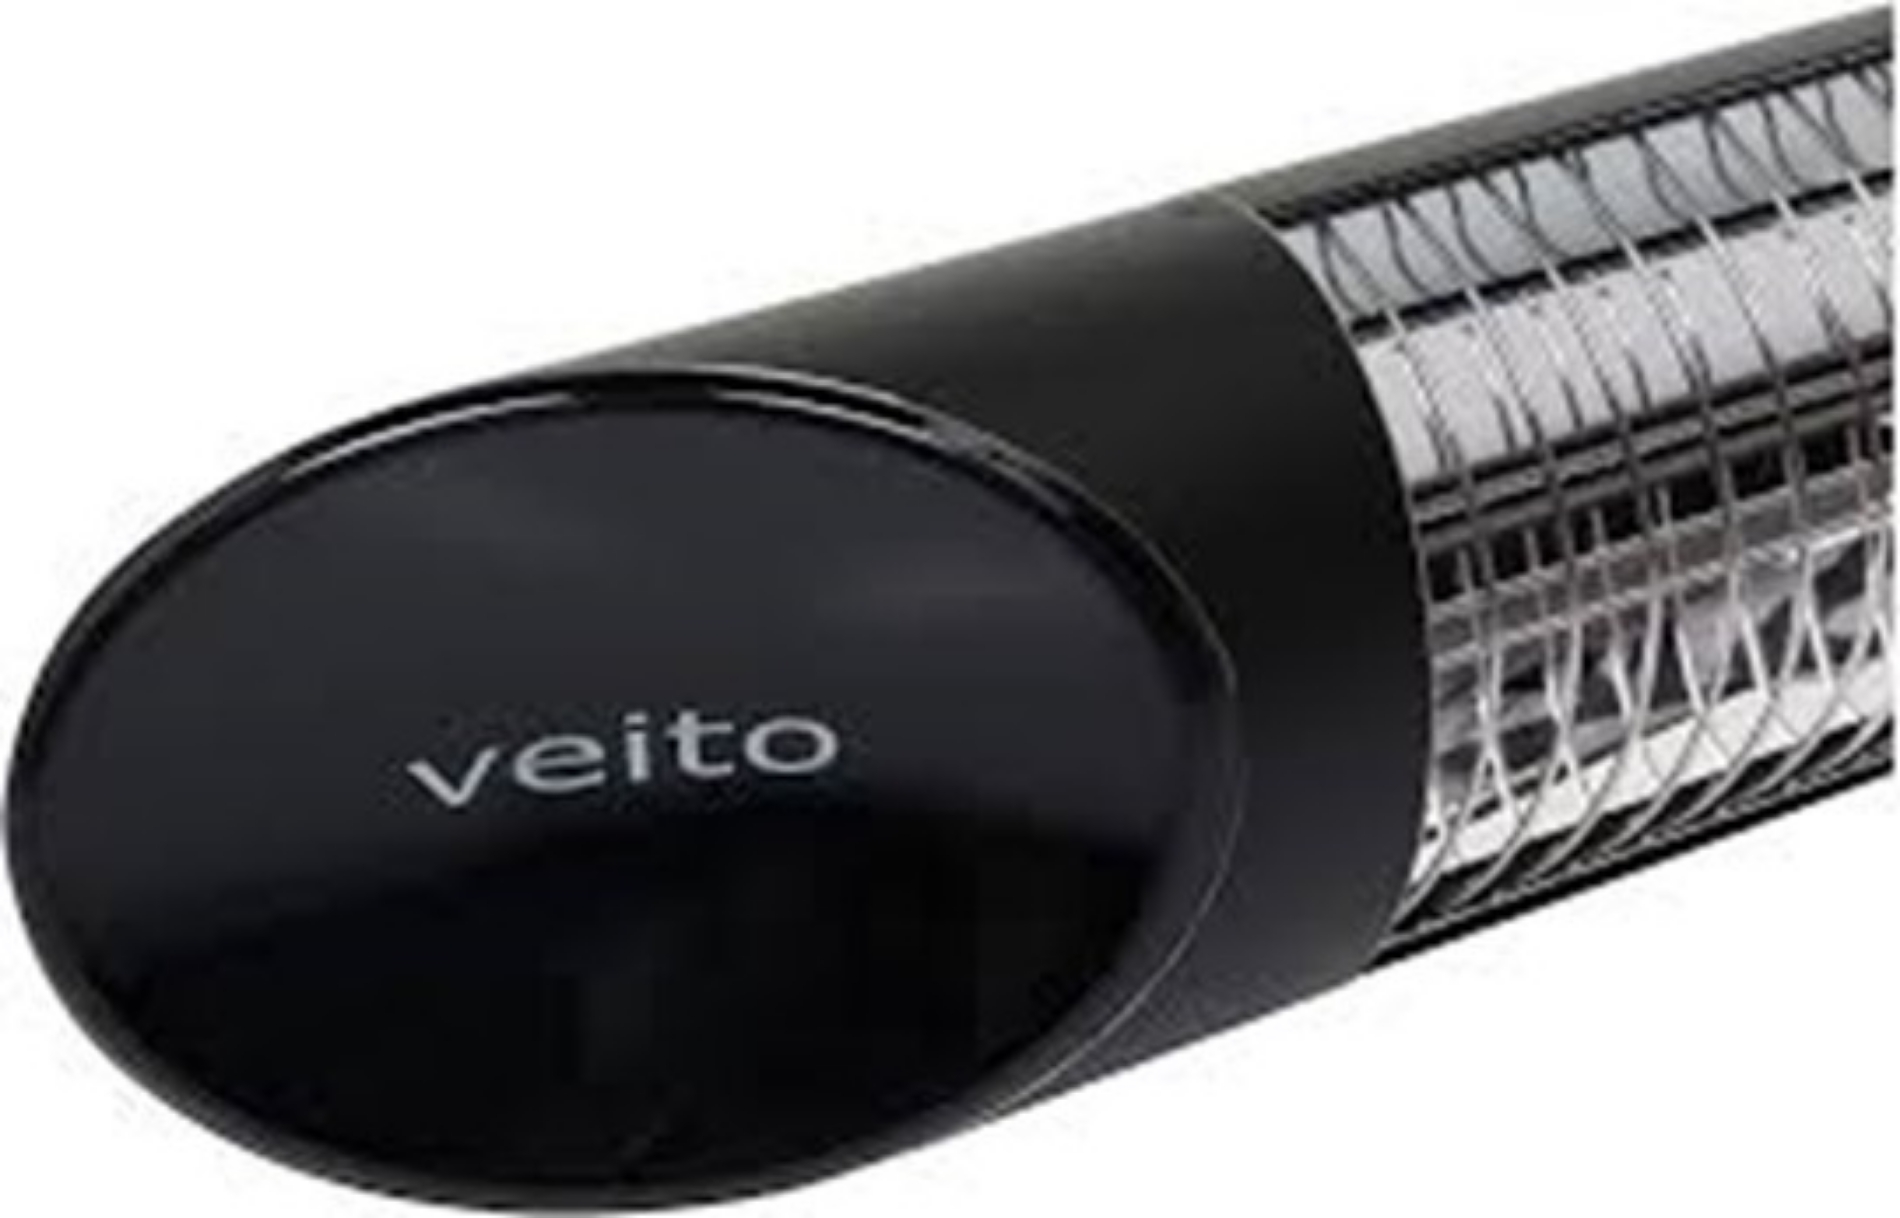 Veito Blade S Black 2.5kW Waterproof Wall Mounted Infrared Heater zoom